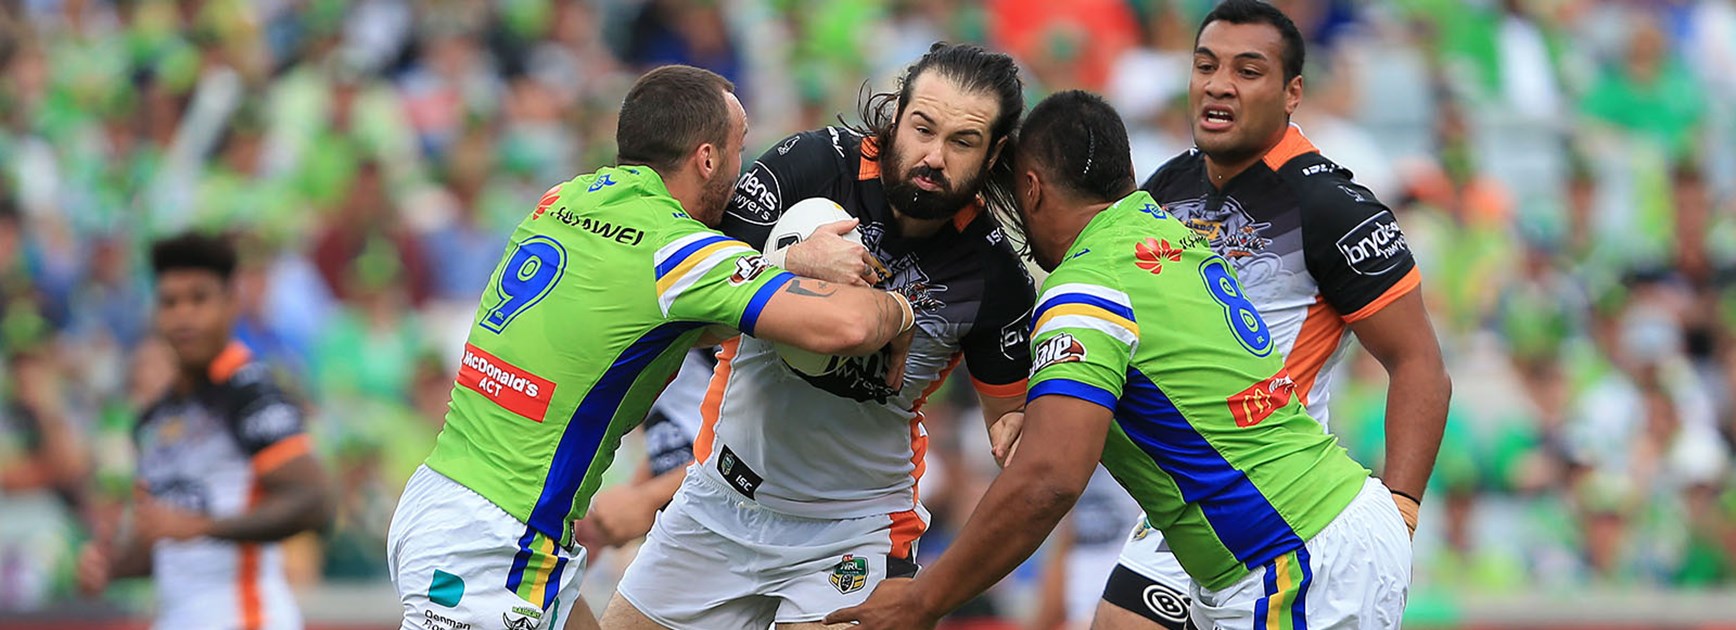 Aaron Woods battles in a tackle against the Raiders in Round 3.